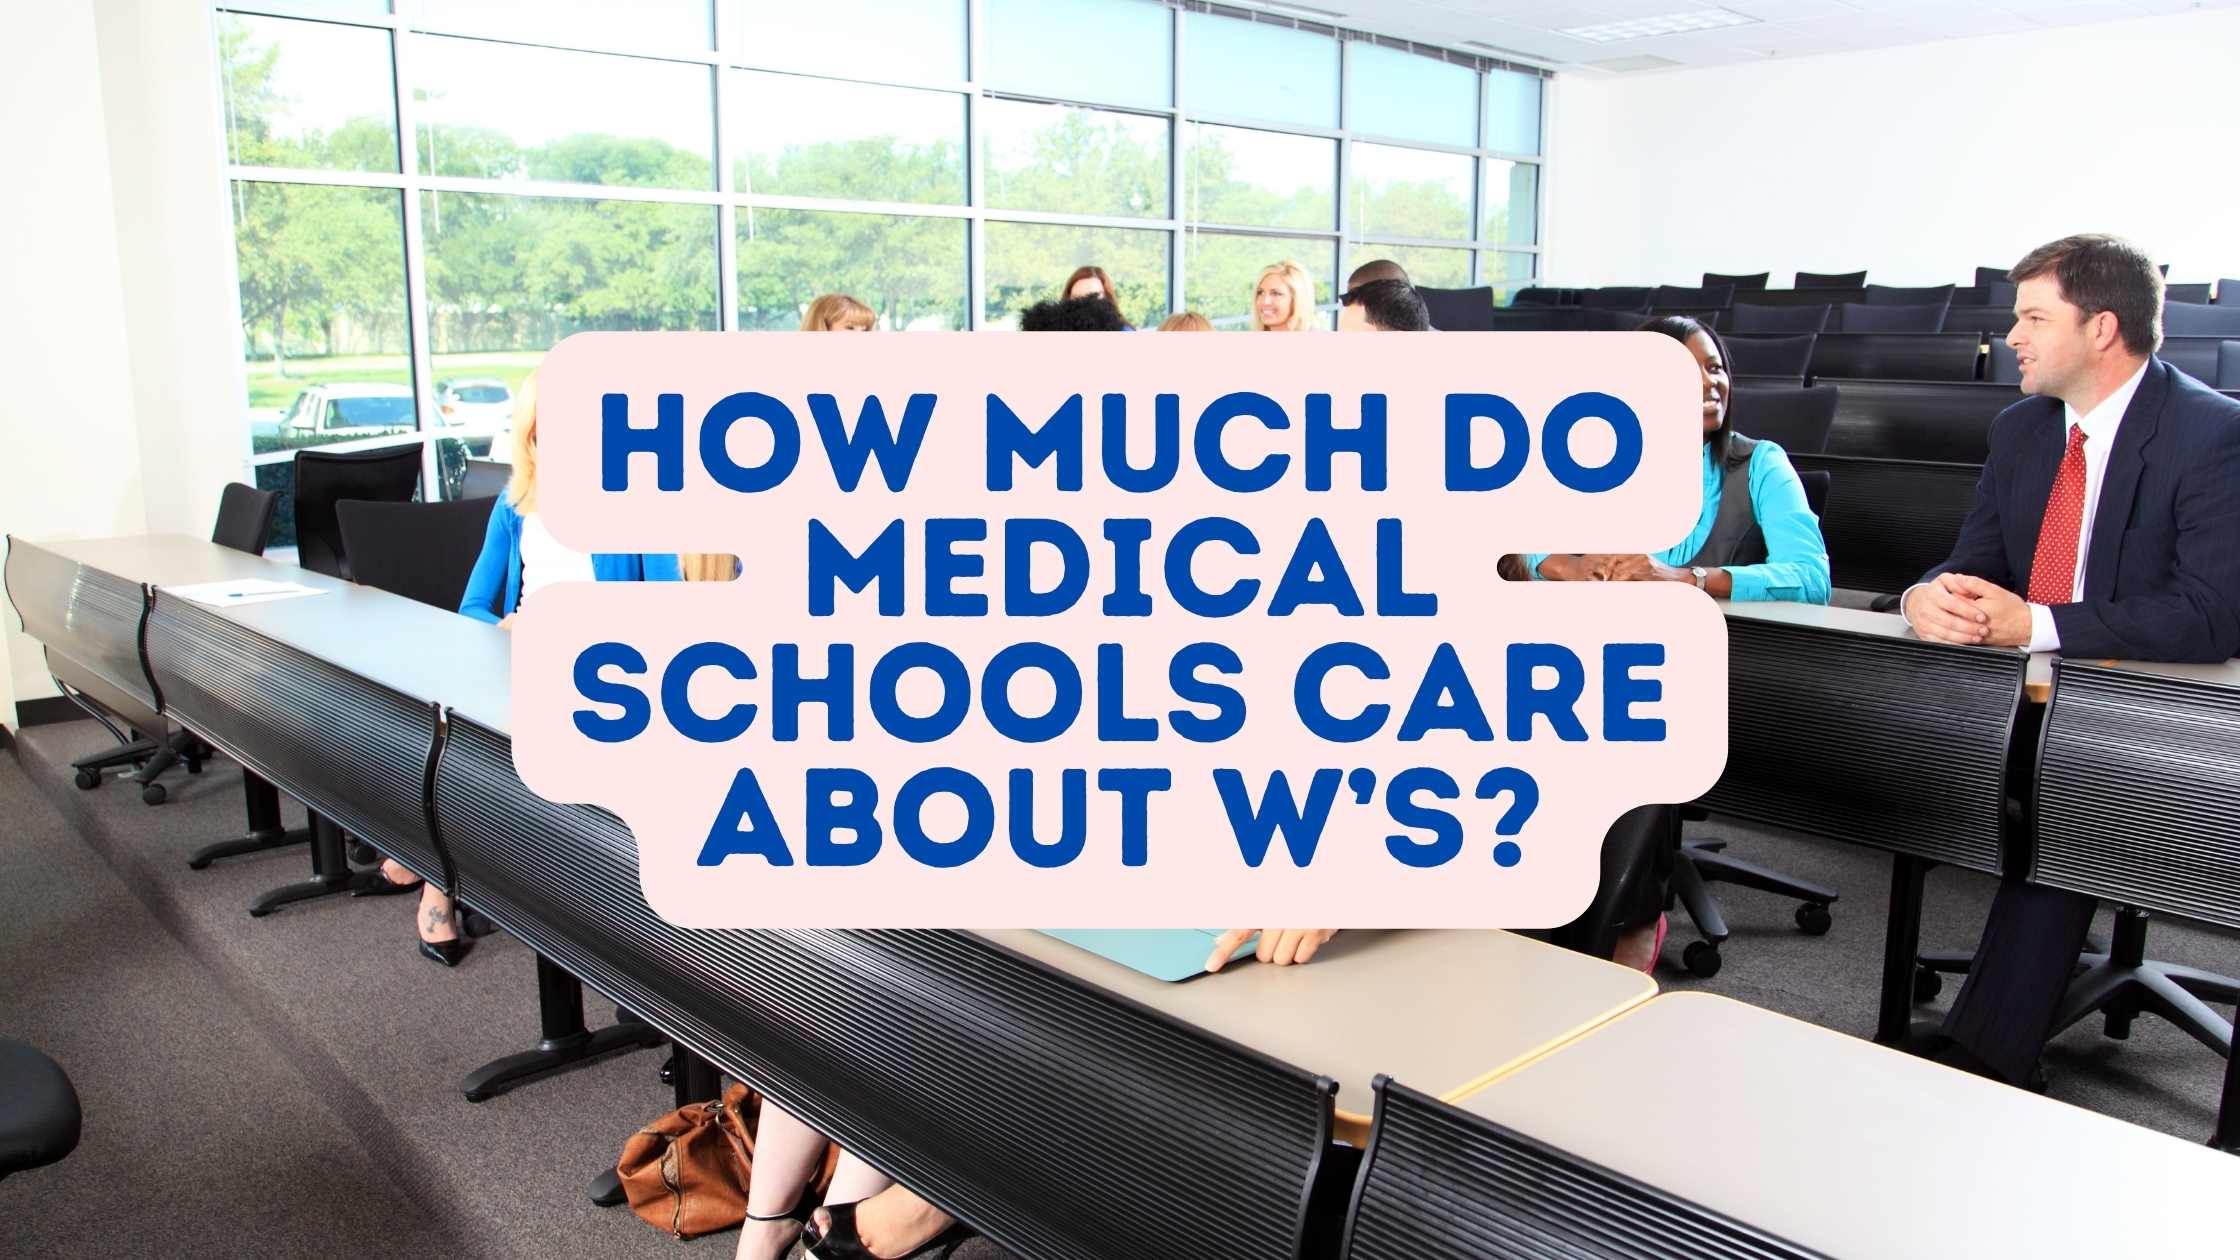 How Much Do Medical Schools Care About W’s?